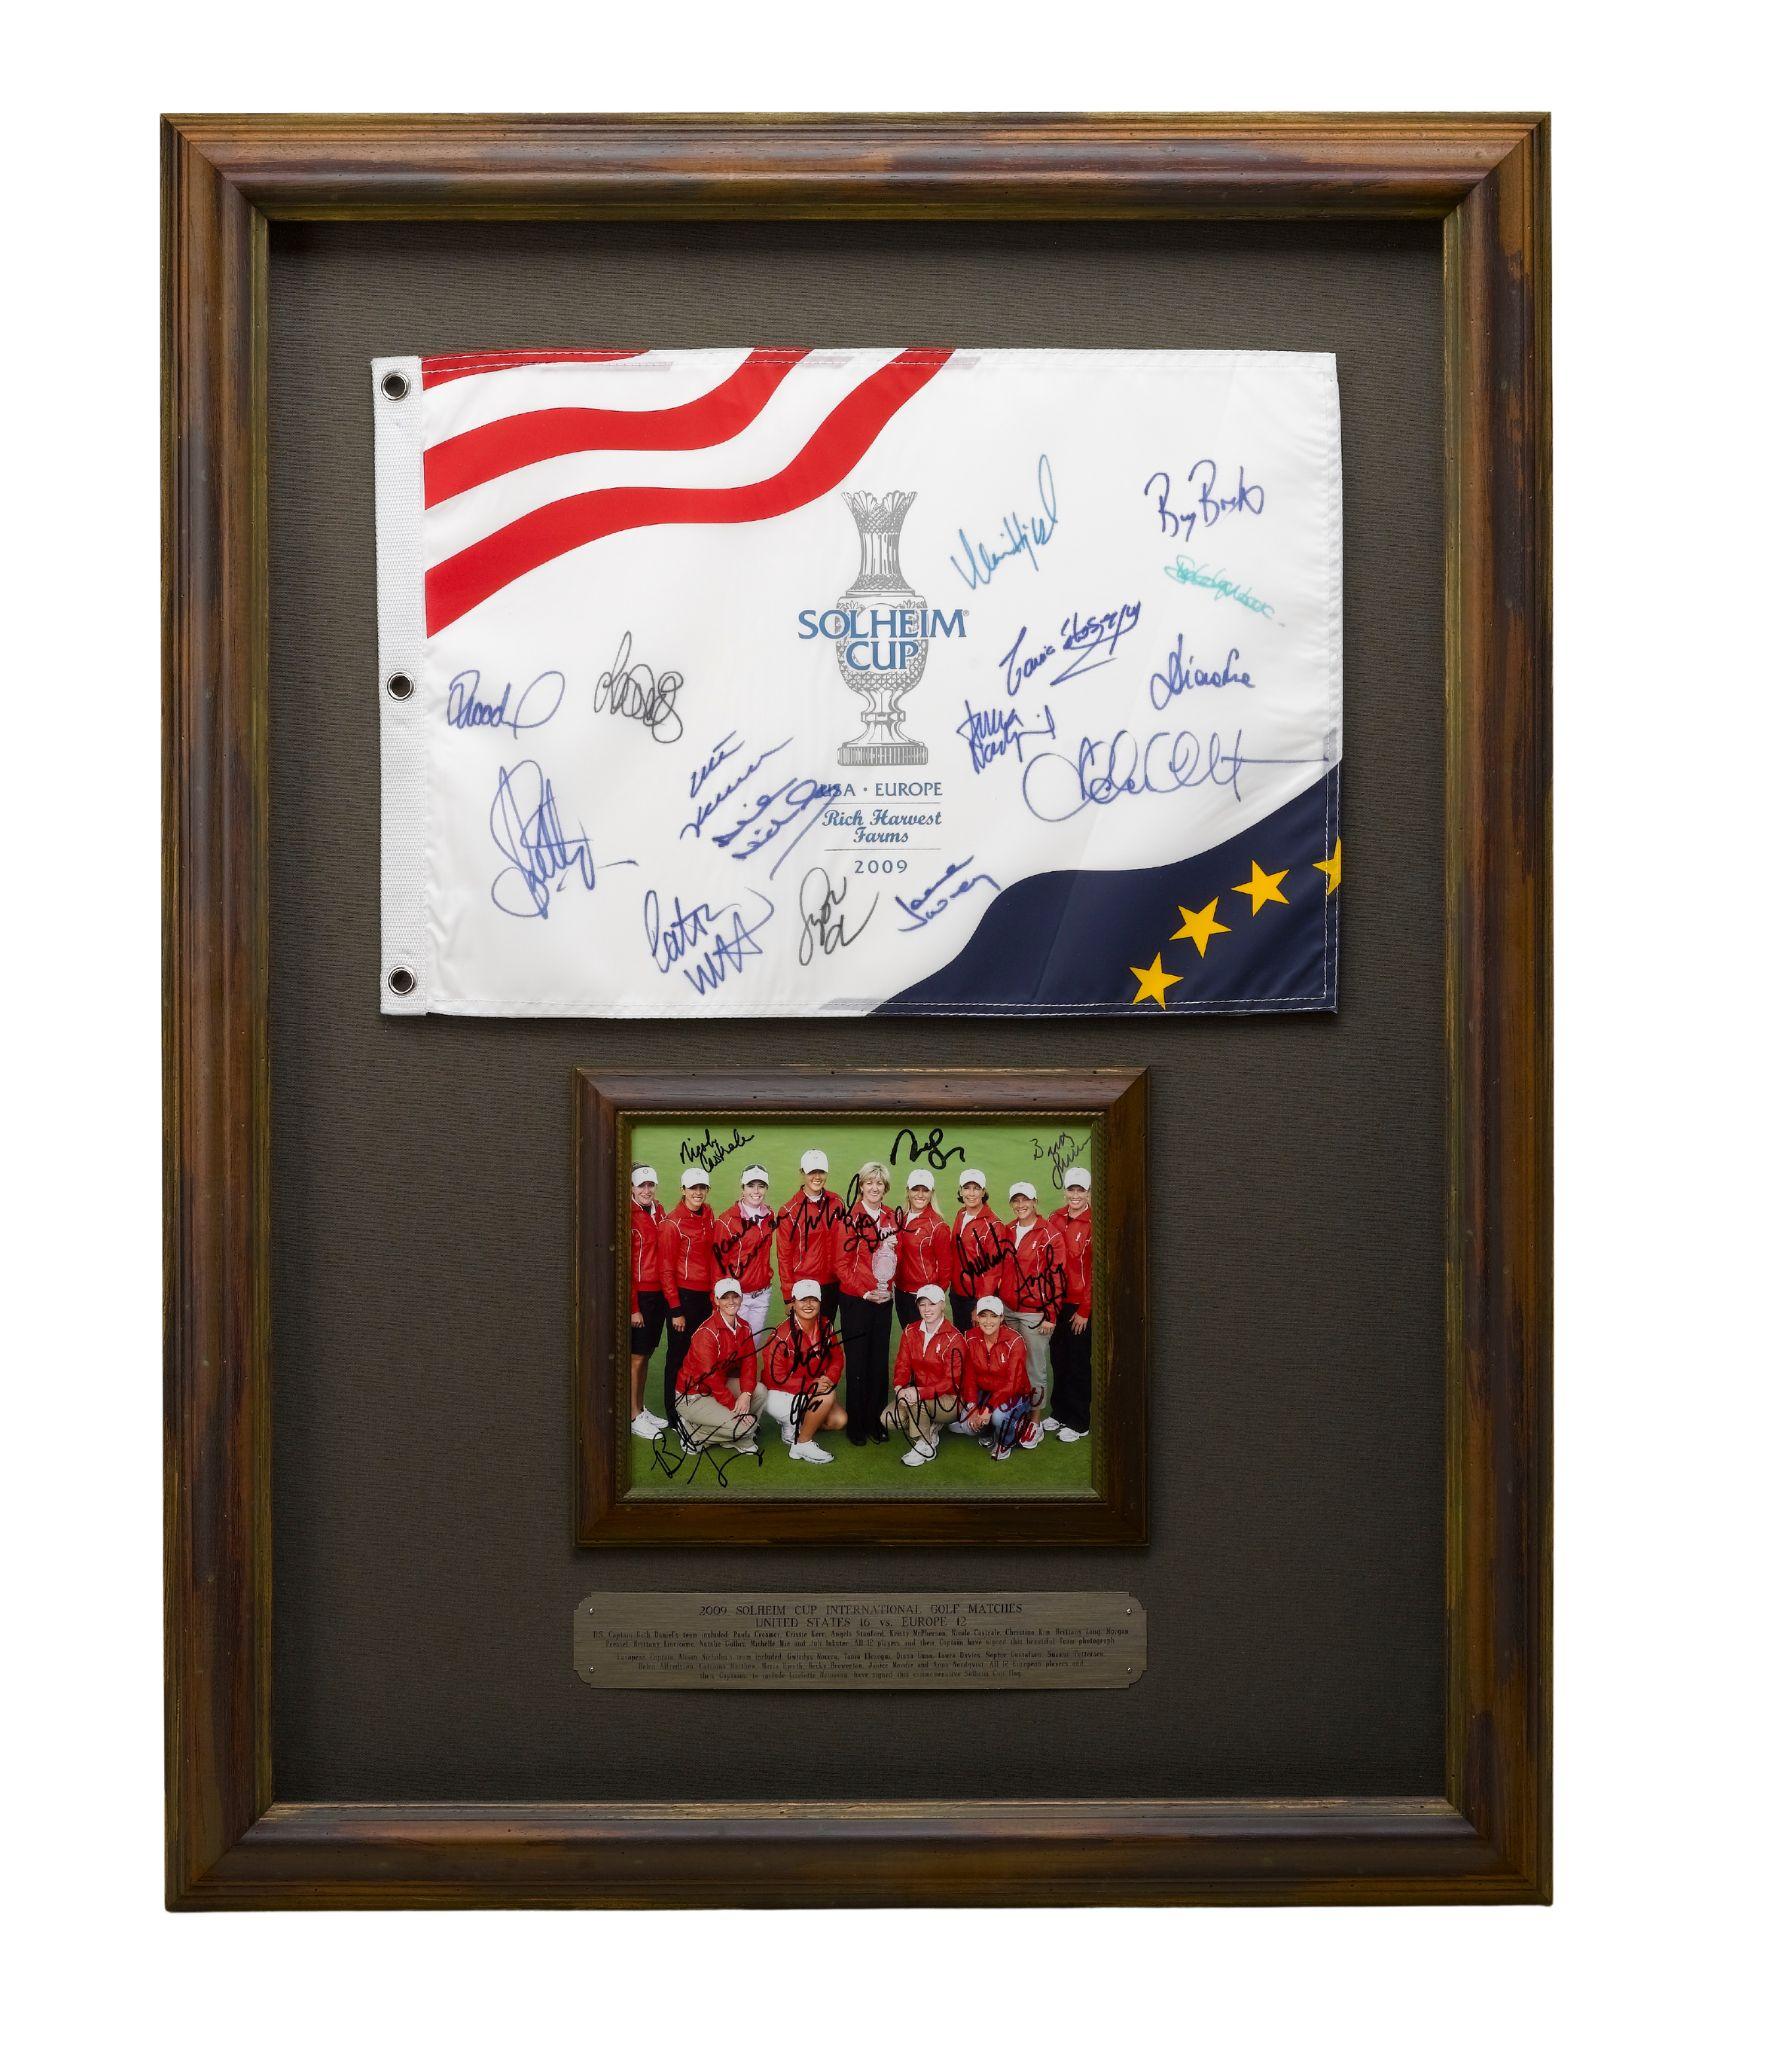 Presented is an autographed collage celebrating the women golfers of the 2009 Solheim Cup U.S. and European teams. The 11th Solheim Cup Matches were held August 21–23, 2009 at Rich Harvest Farms in Sugar Grove, Illinois. The biennial Solheim Cup